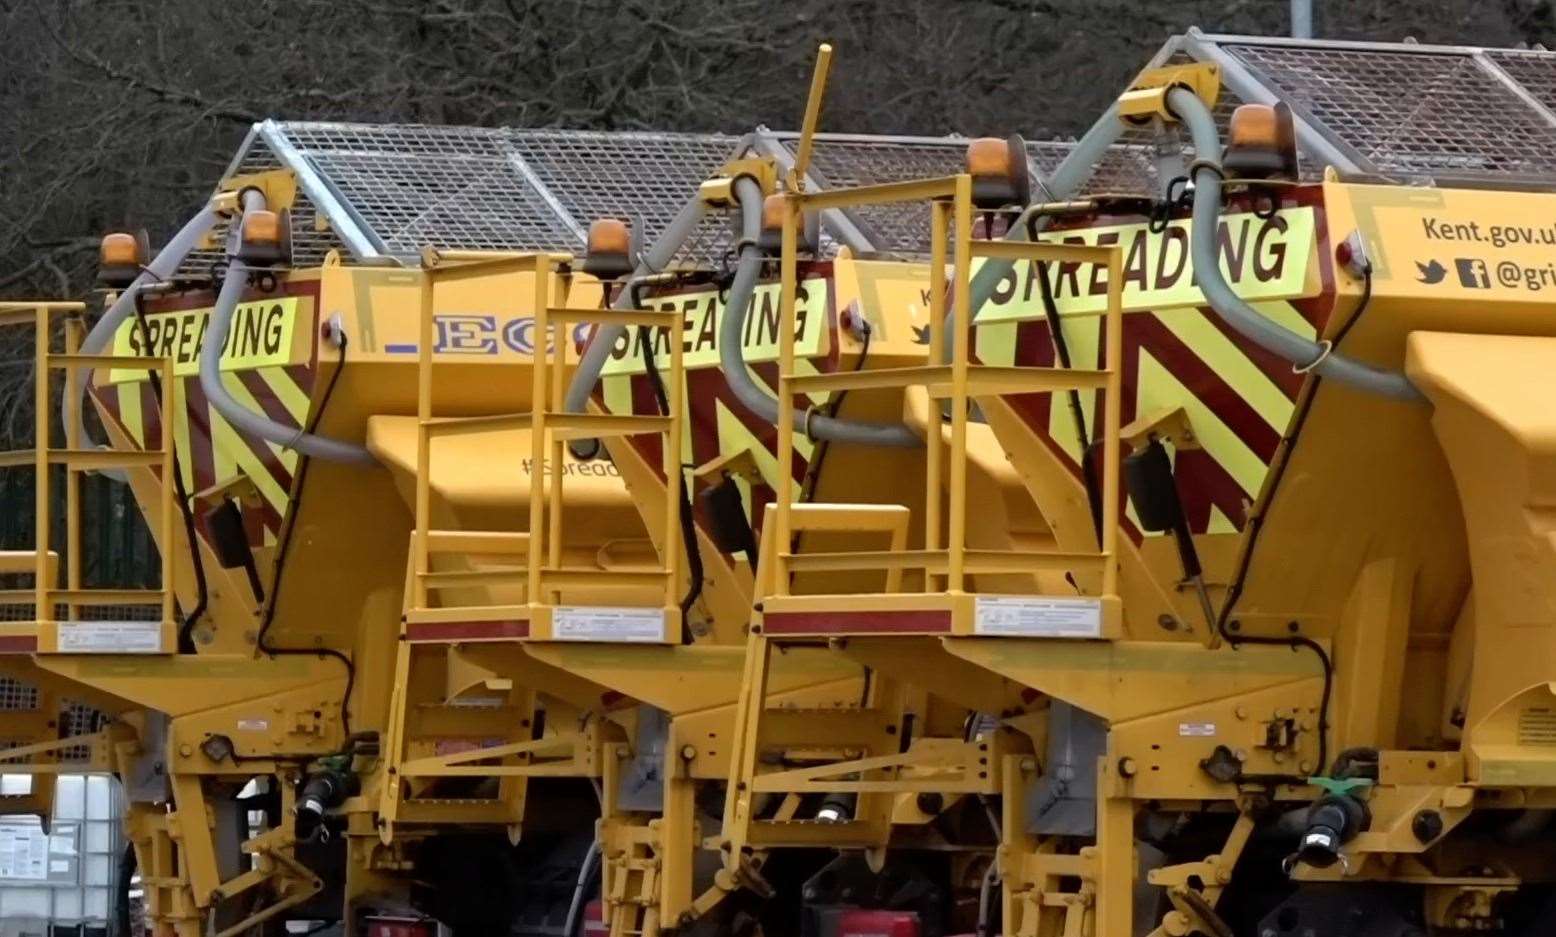 Kent County Council gritters